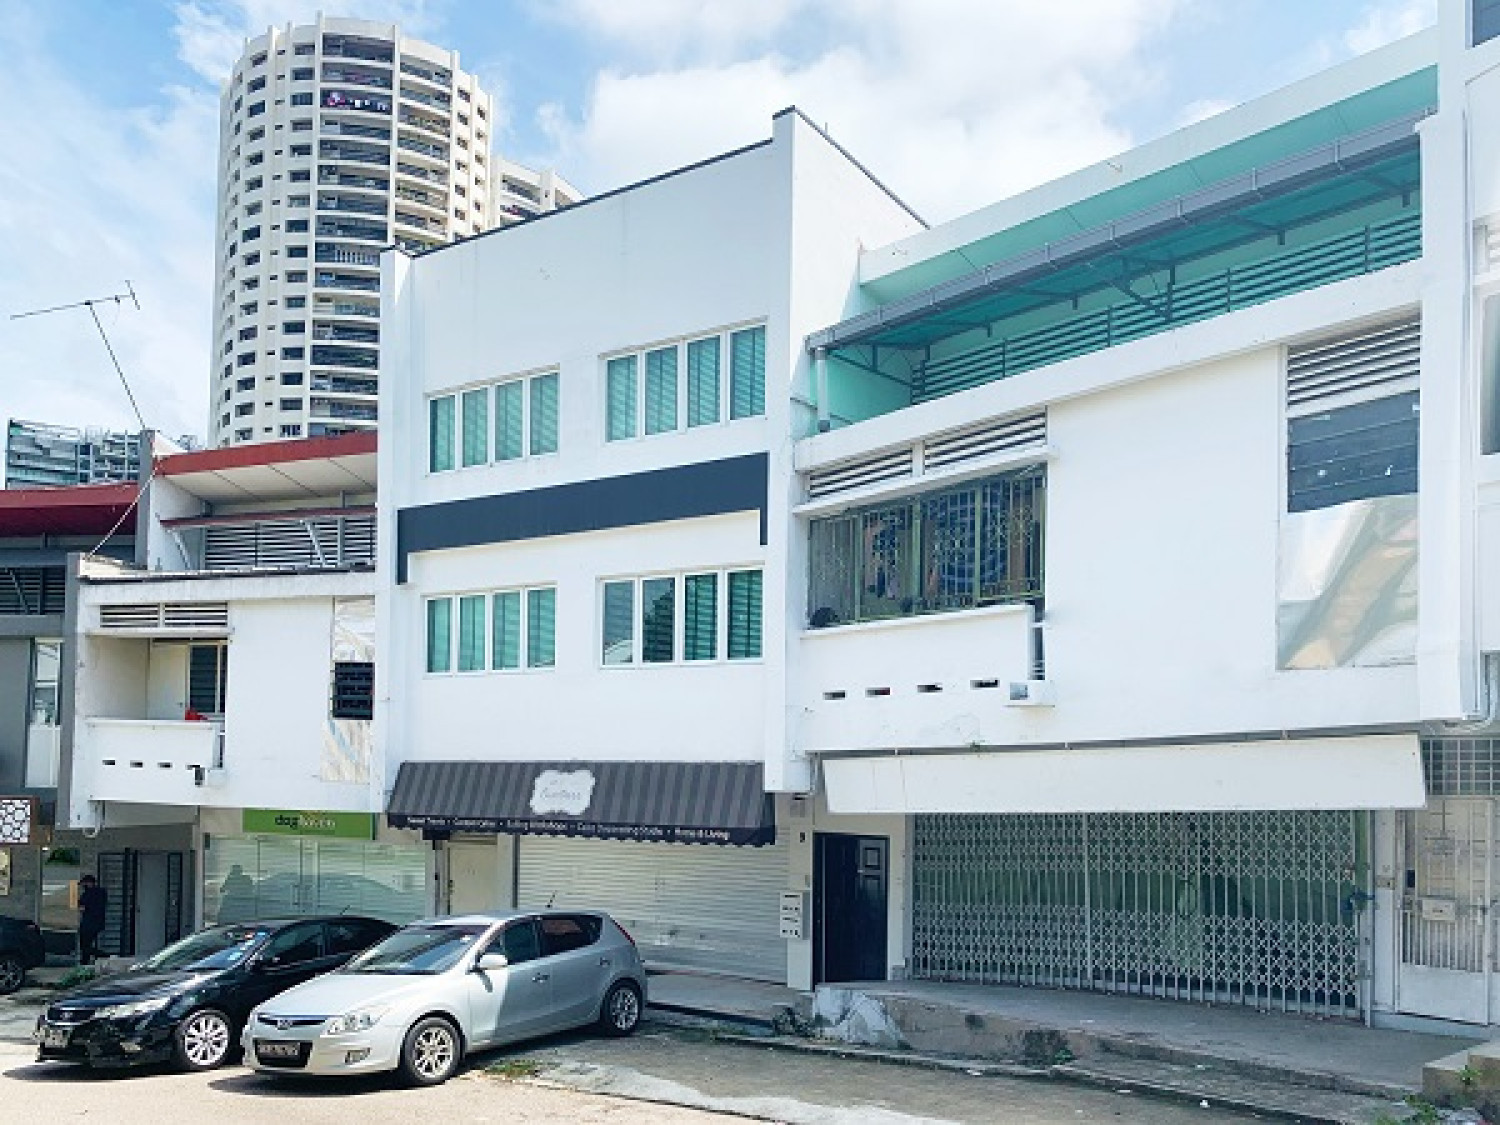 Freehold shophouses in Upper Thomson going for $22.88 mil - Property News